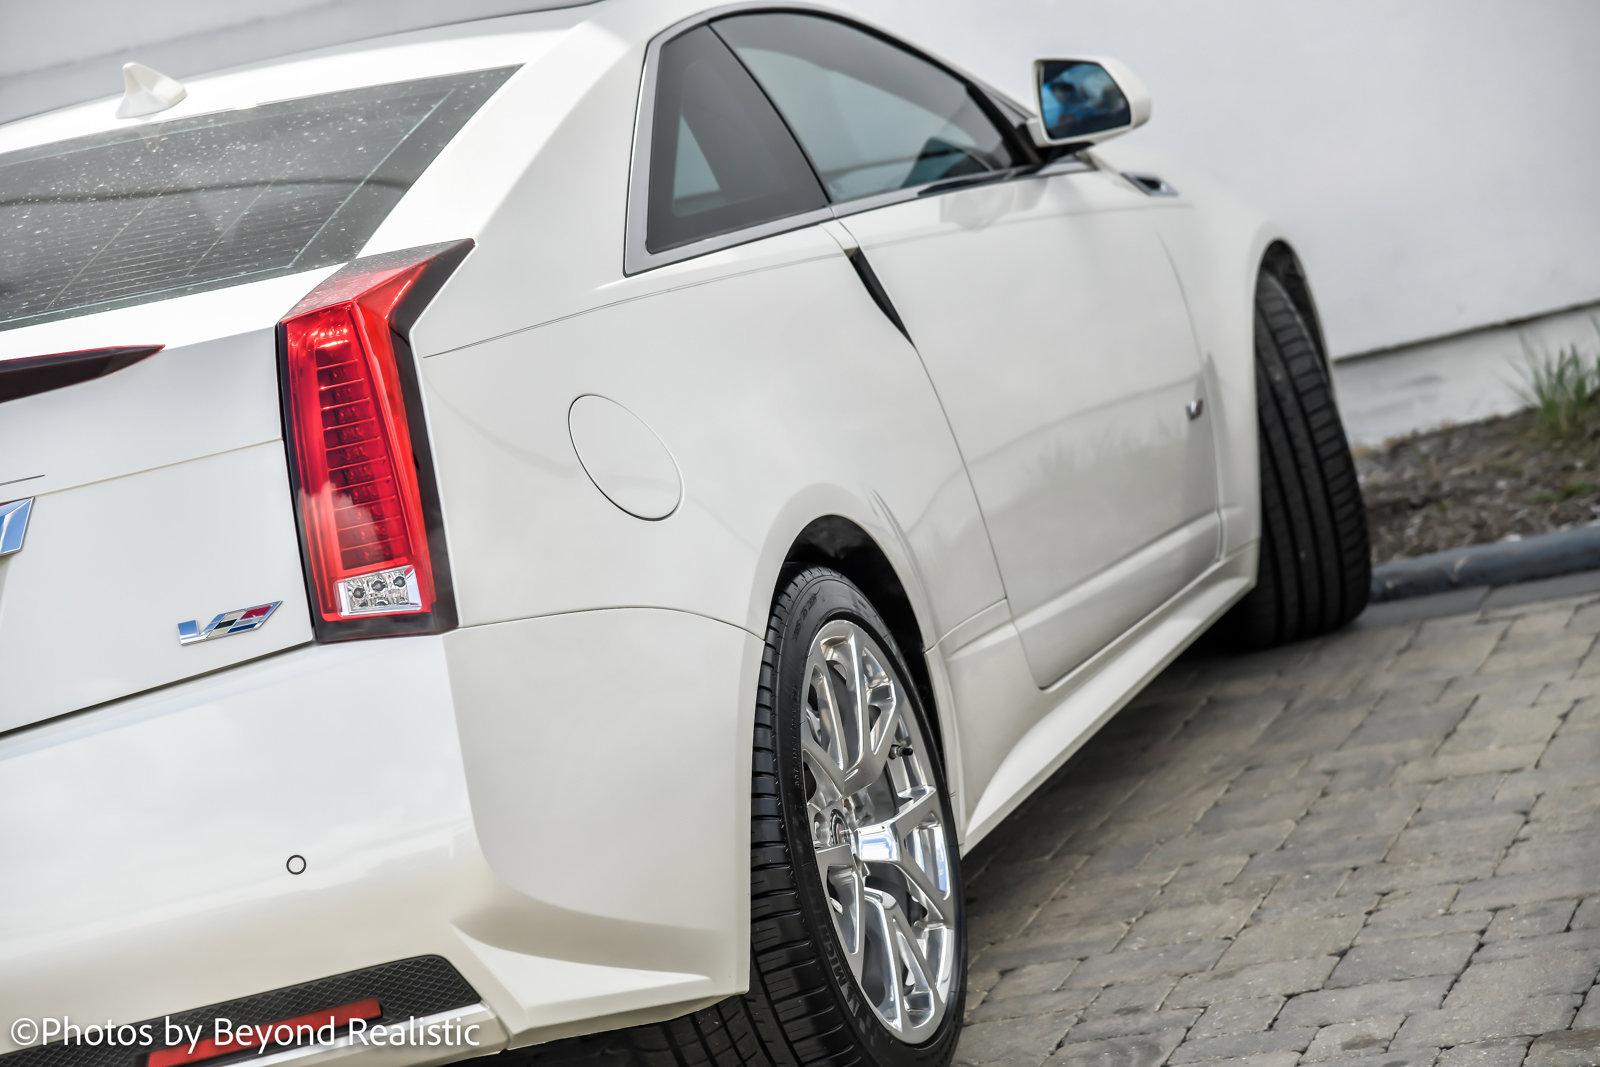 Used 2012 Cadillac CTS-V Coupe  | Downers Grove, IL